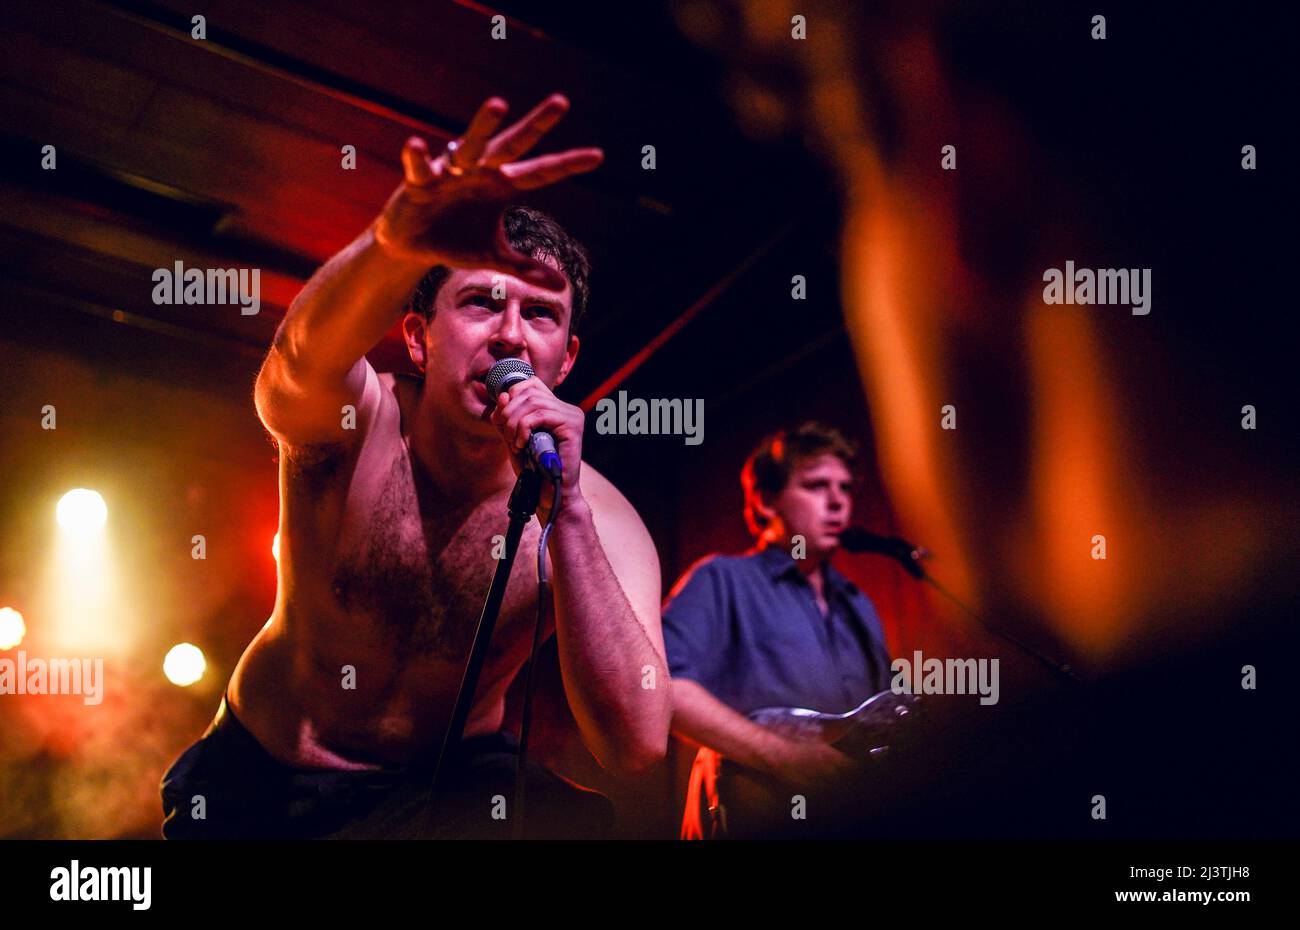 Copenhagen, Denmark. 08th, April 2022. The English post-punk band Shame performs a live concert at VEGA in Copenhagen. Here vocalist Charlie Steen is seen live on stage. (Photo credit: Gonzales Photo - Joe Miller). Stock Photo